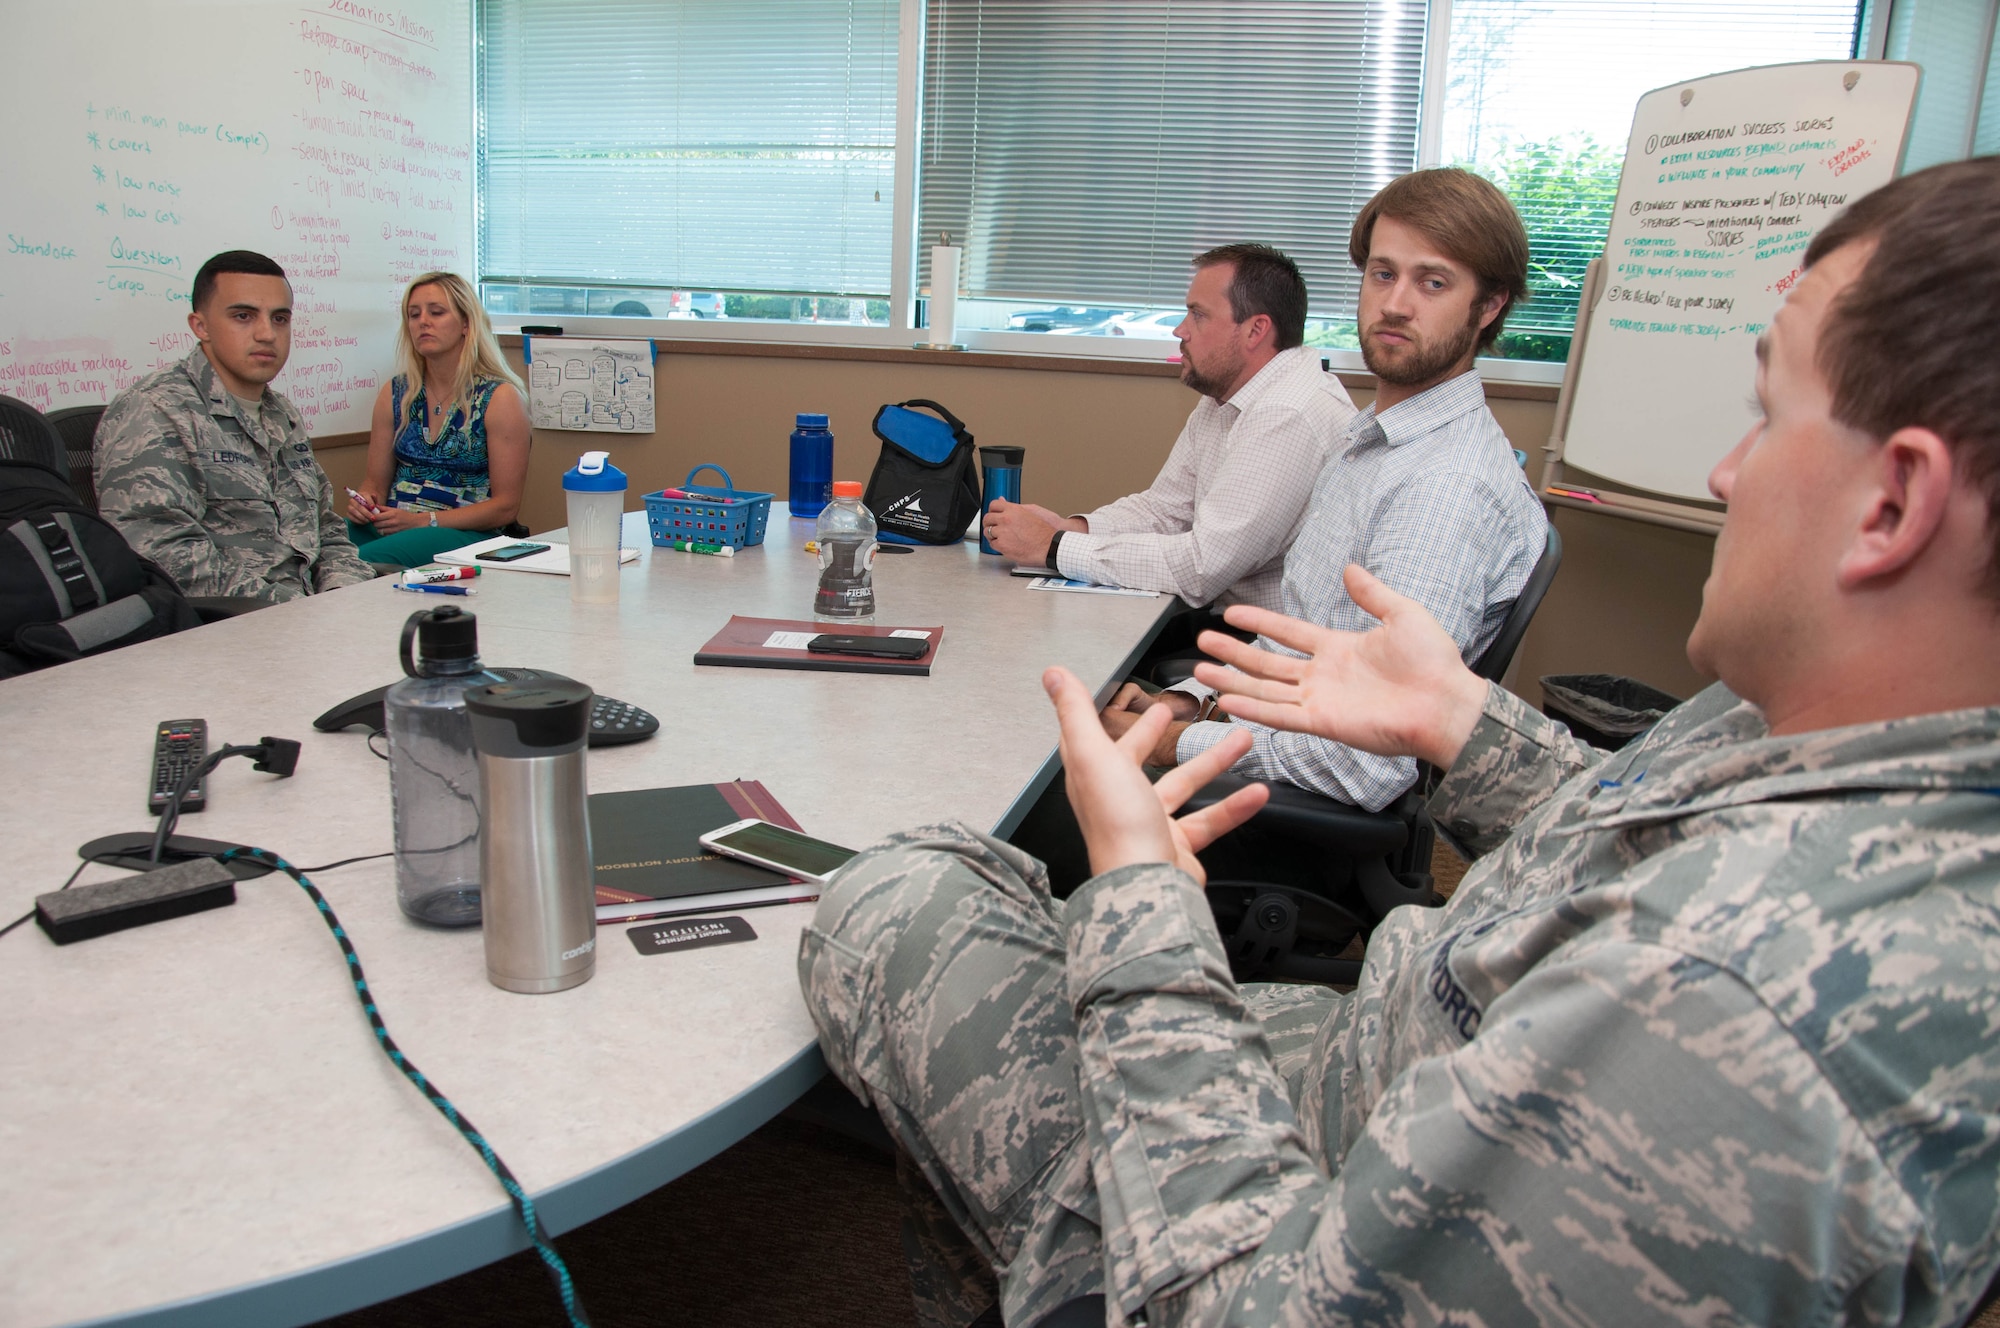 DAYTON, Ohio – 1st Lt. Connor Wiese (right), a development engineer with Team Wright-Patt, proposes an idea to his team during a brainstorming session Aug. 2 as part of the Air Force Research Laboratory Commander’s Challenge 2017.  The challenge brings Airmen together from a wide-range of specialties to tackle a real-world problem with a maximum budget of $50,000 and six months to develop a working demonstration. (U.S. Air Force photo/John Harrington)